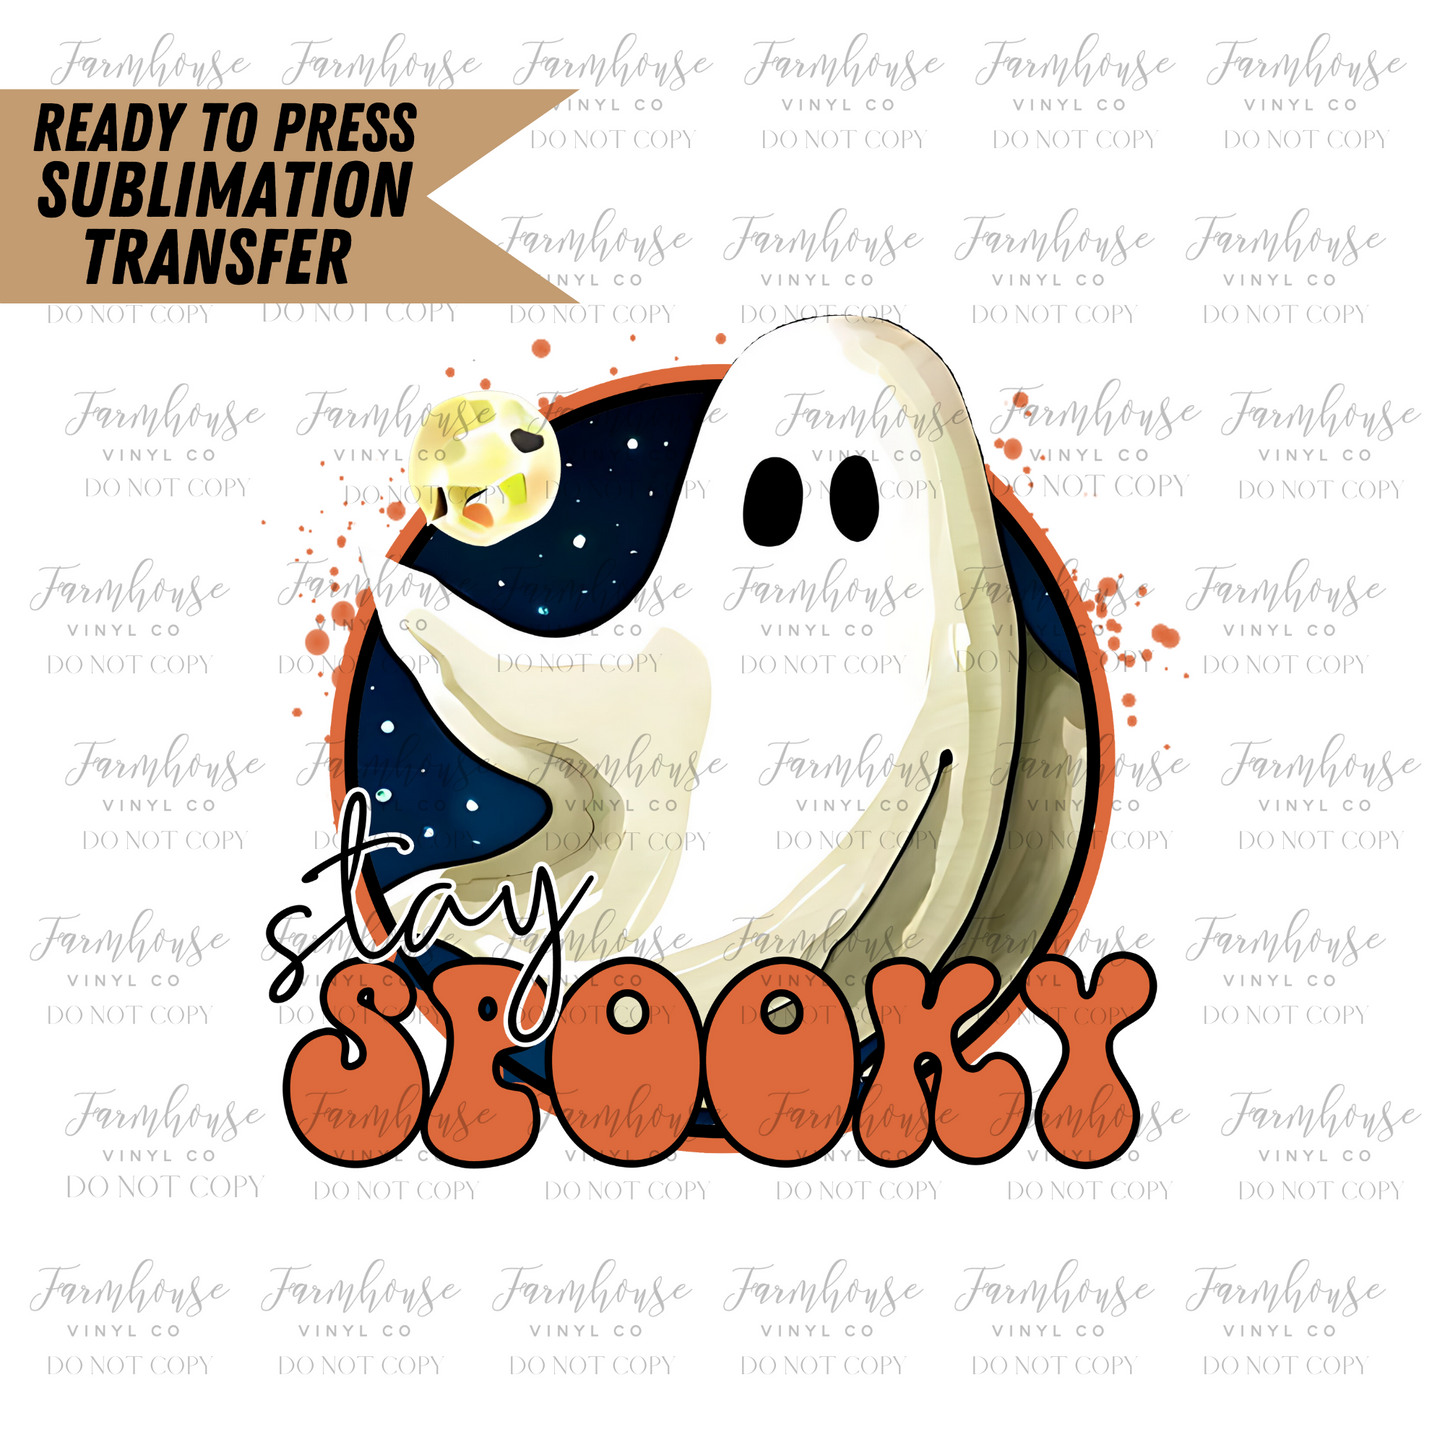 Stay Spooky Ghost Ready To Press Sublimation Transfer